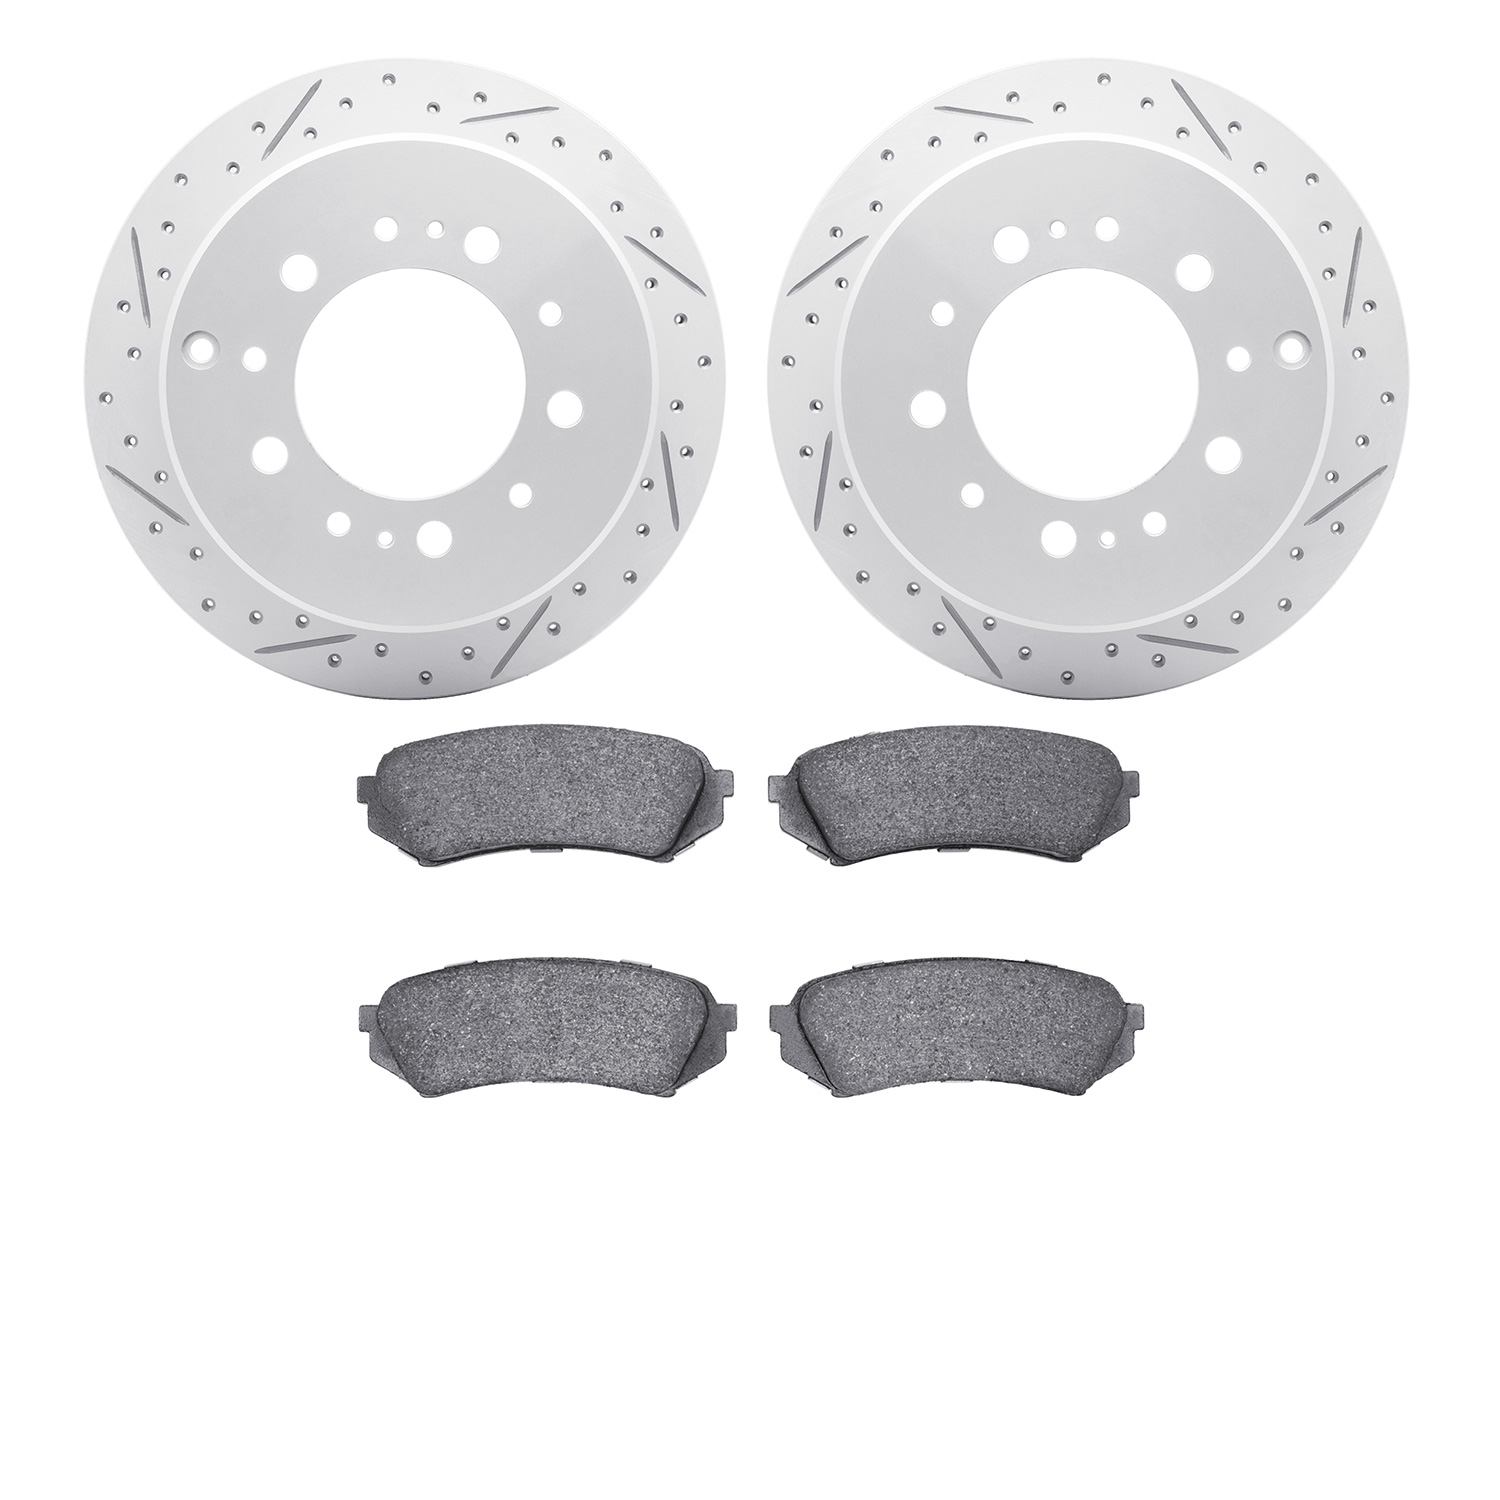 2502-76116 Geoperformance Drilled/Slotted Rotors w/5000 Advanced Brake Pads Kit, 1998-2007 Lexus/Toyota/Scion, Position: Rear